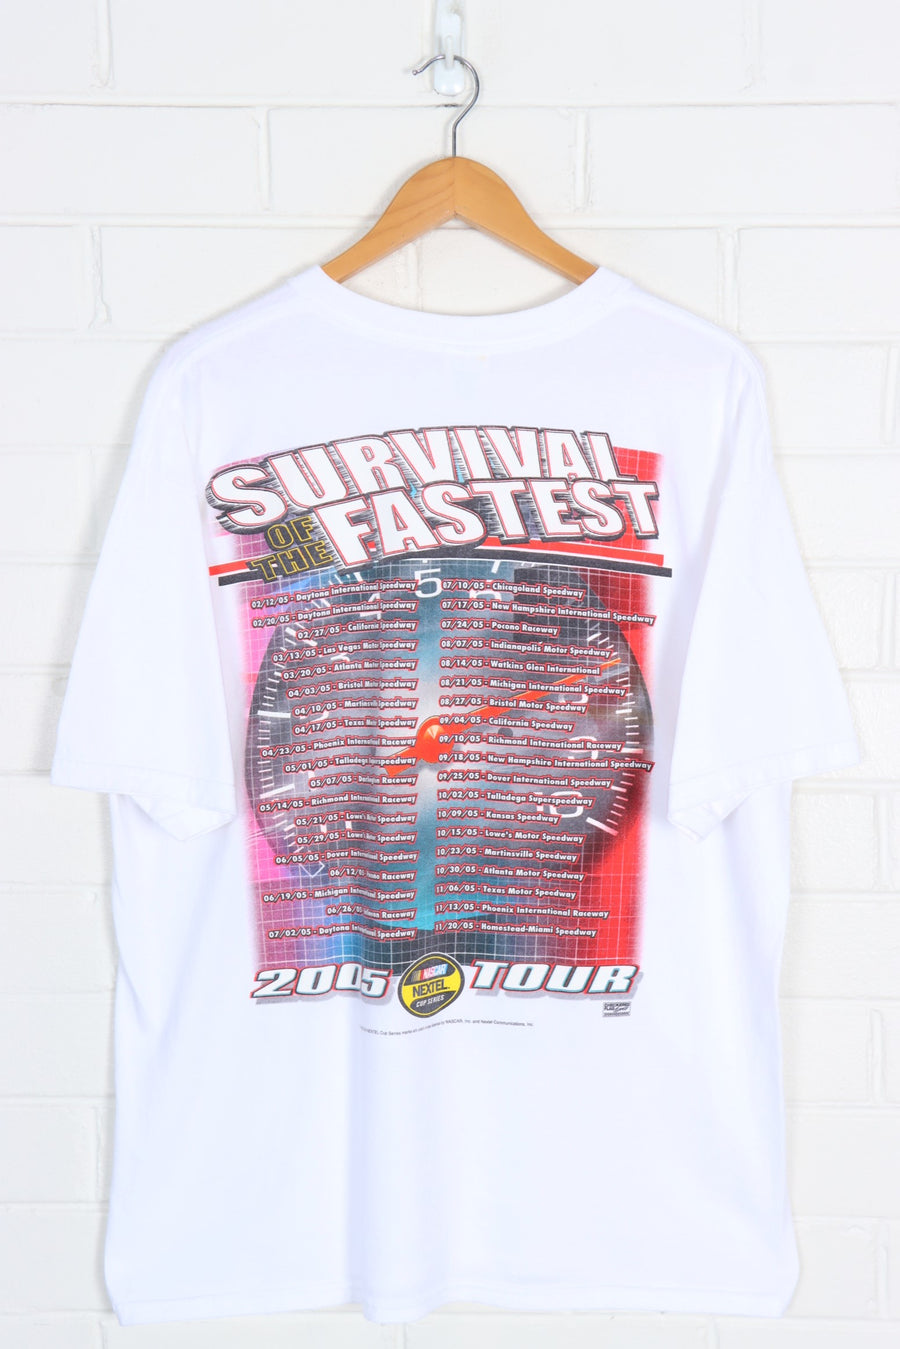 NASCAR 'Survival of the Fastest' Colourful Cup Series Racing Tee (XL)